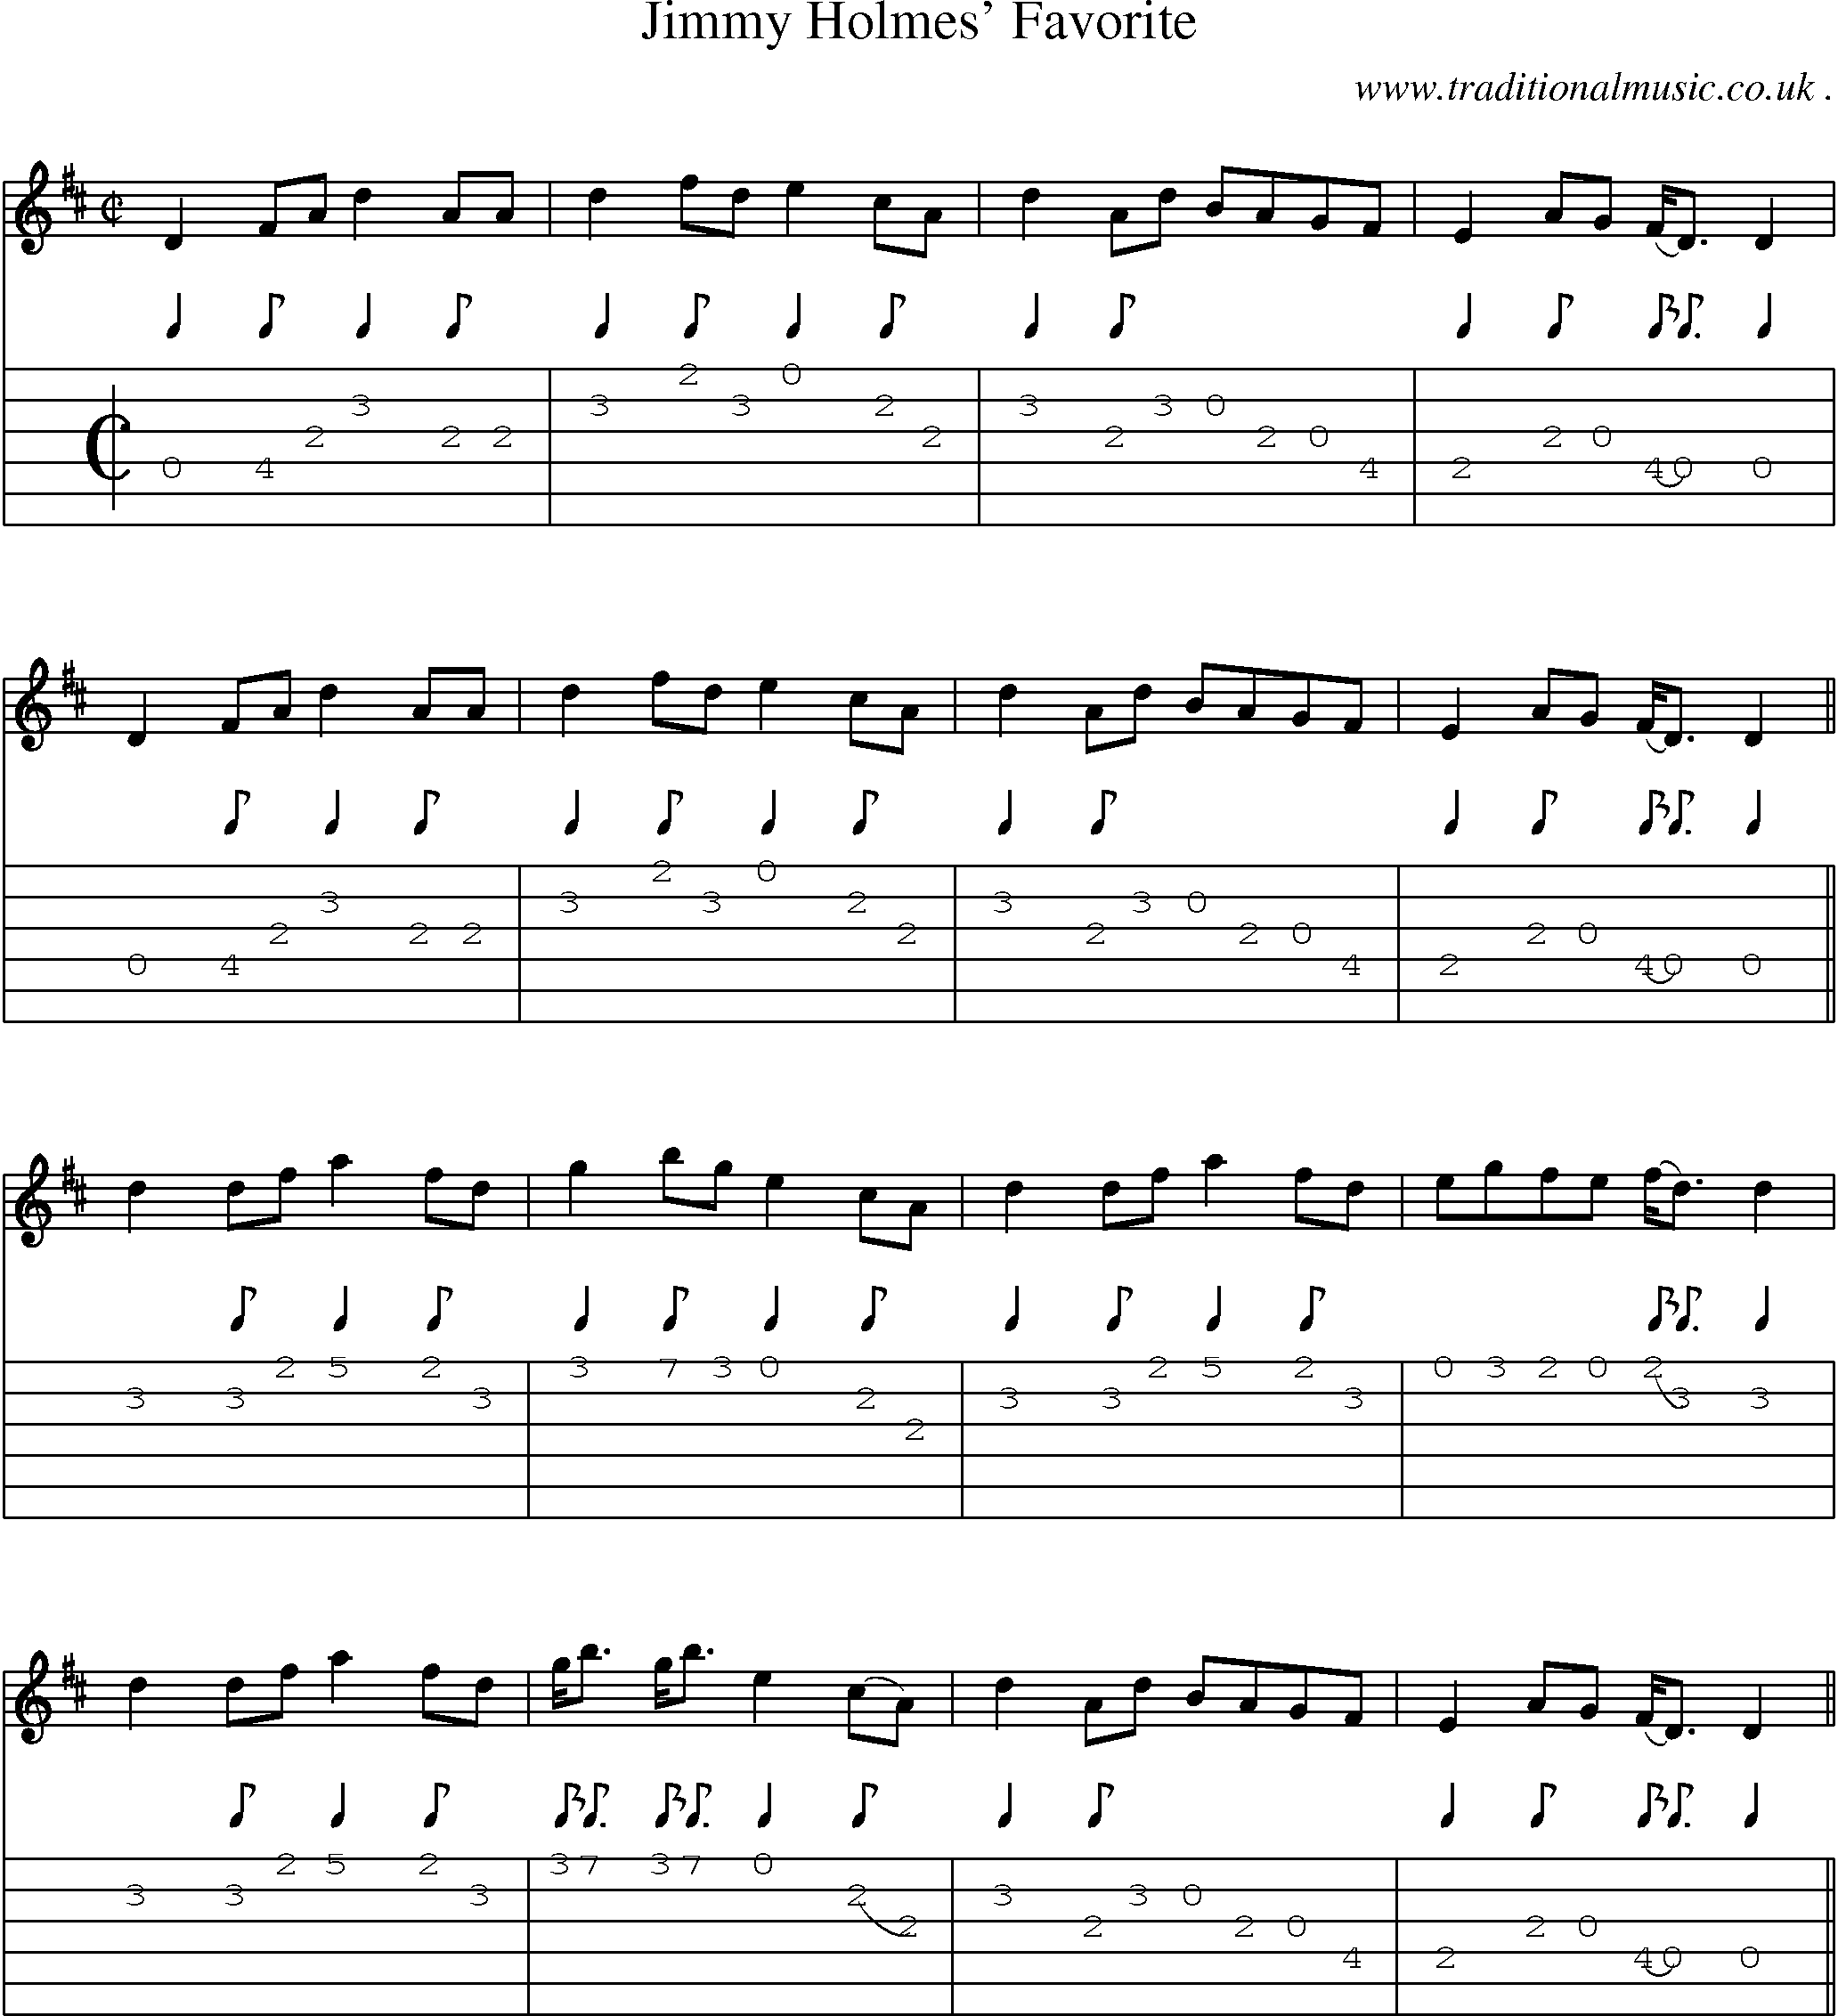 Sheet-Music and Guitar Tabs for Jimmy Holmes Favorite